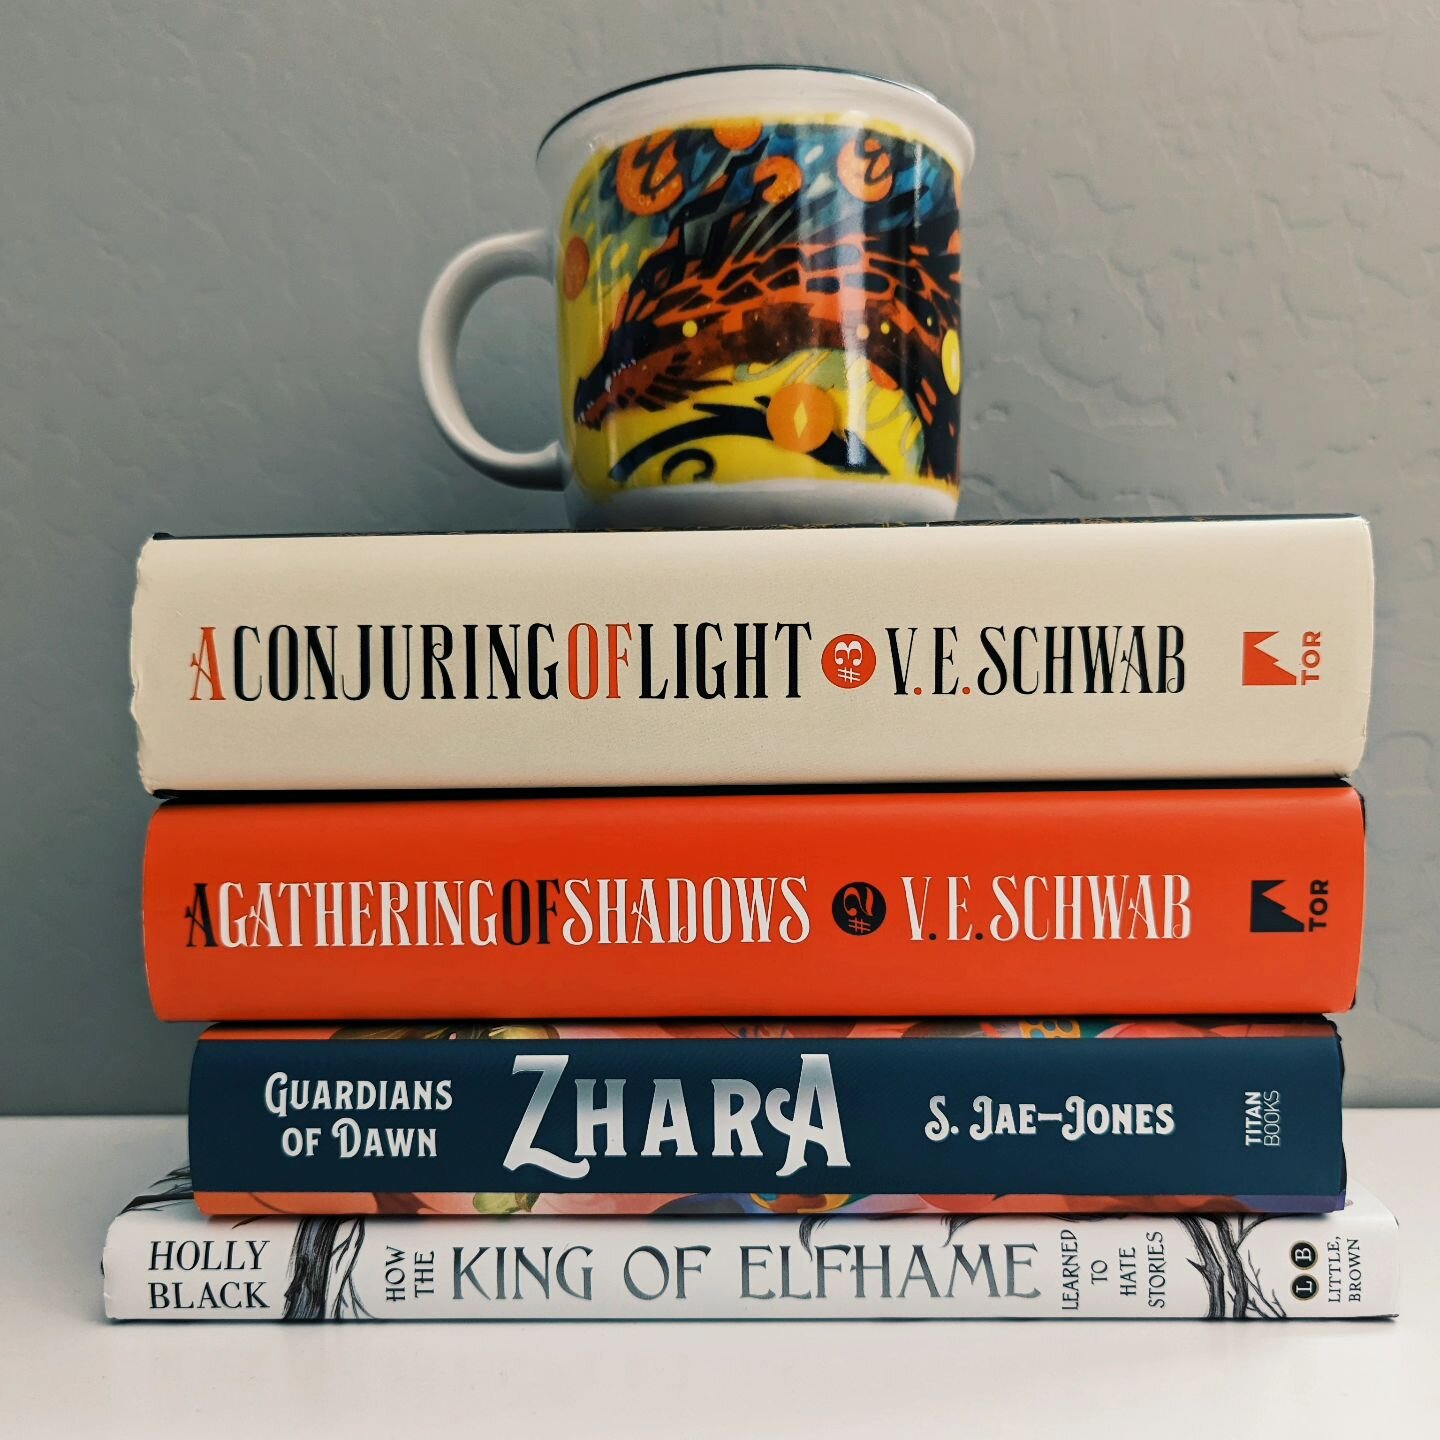 What book(s) are you excited to read this month?

My most anticipated read of the year comes out this month (The Fragile Threads of Power by V.E. Schwab), so I am hoping to finish my reread of the first three books. I think I have something like 14 d